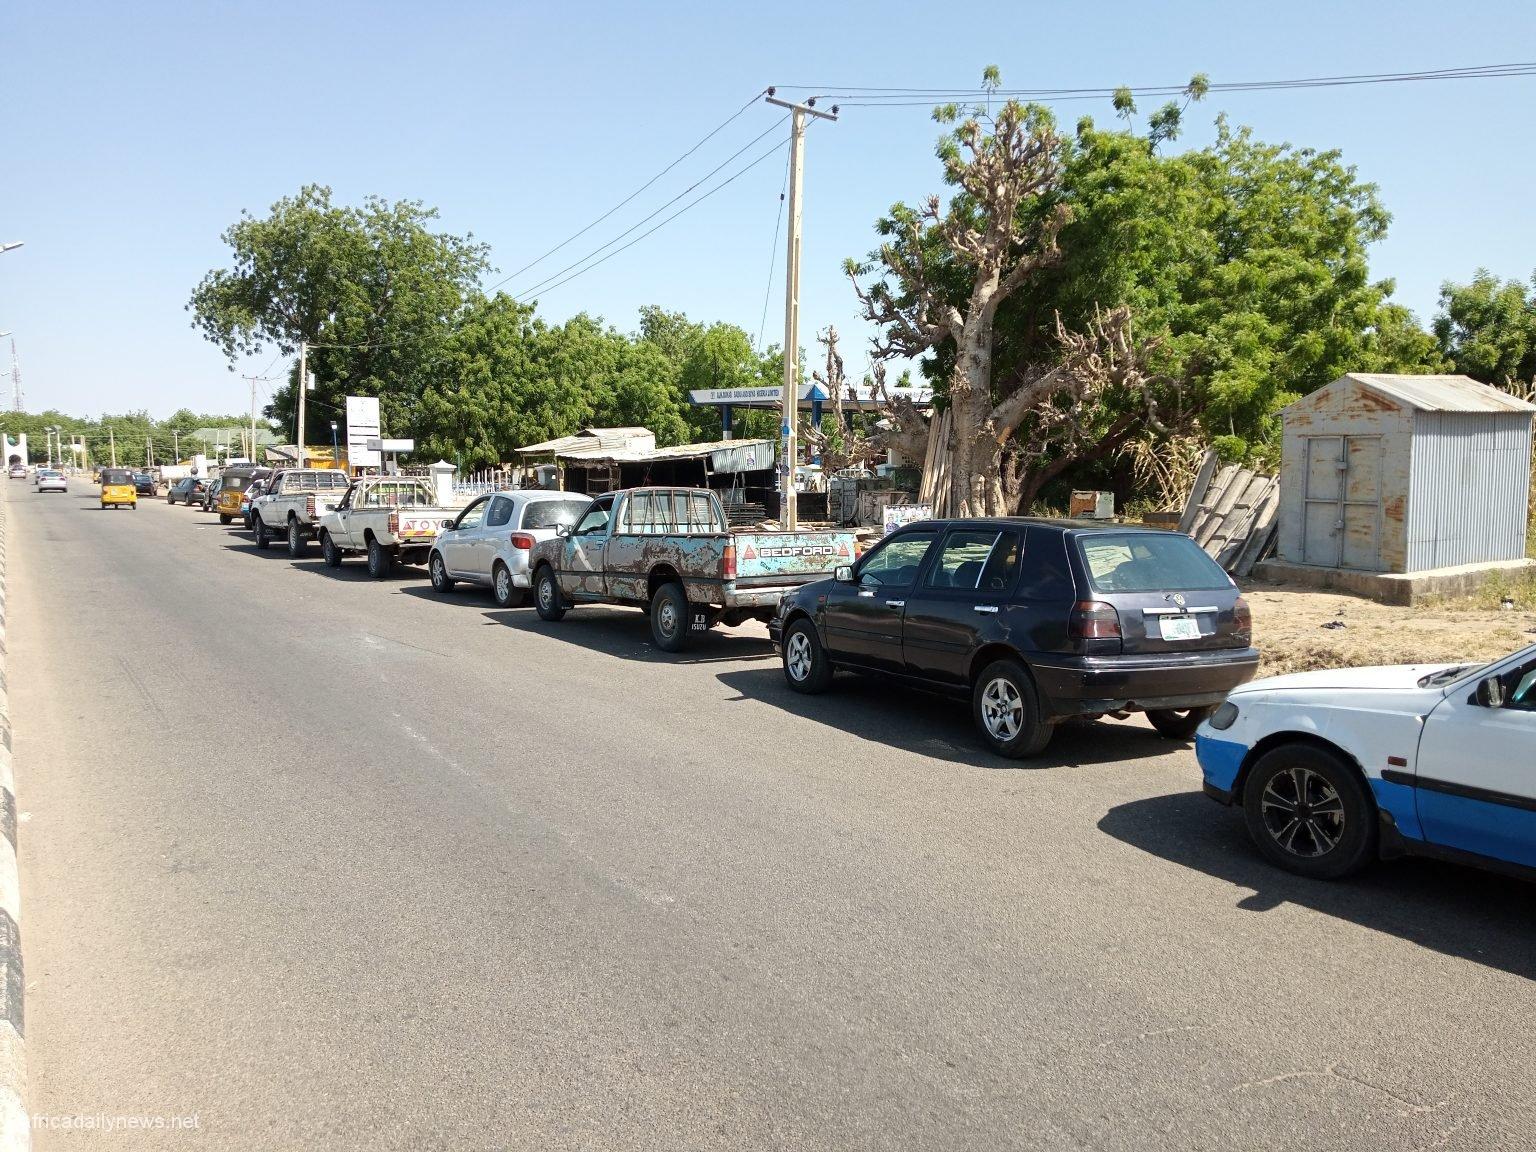 Long Queues Spotted In Abuja As Fuel Scarcity Hits FCT